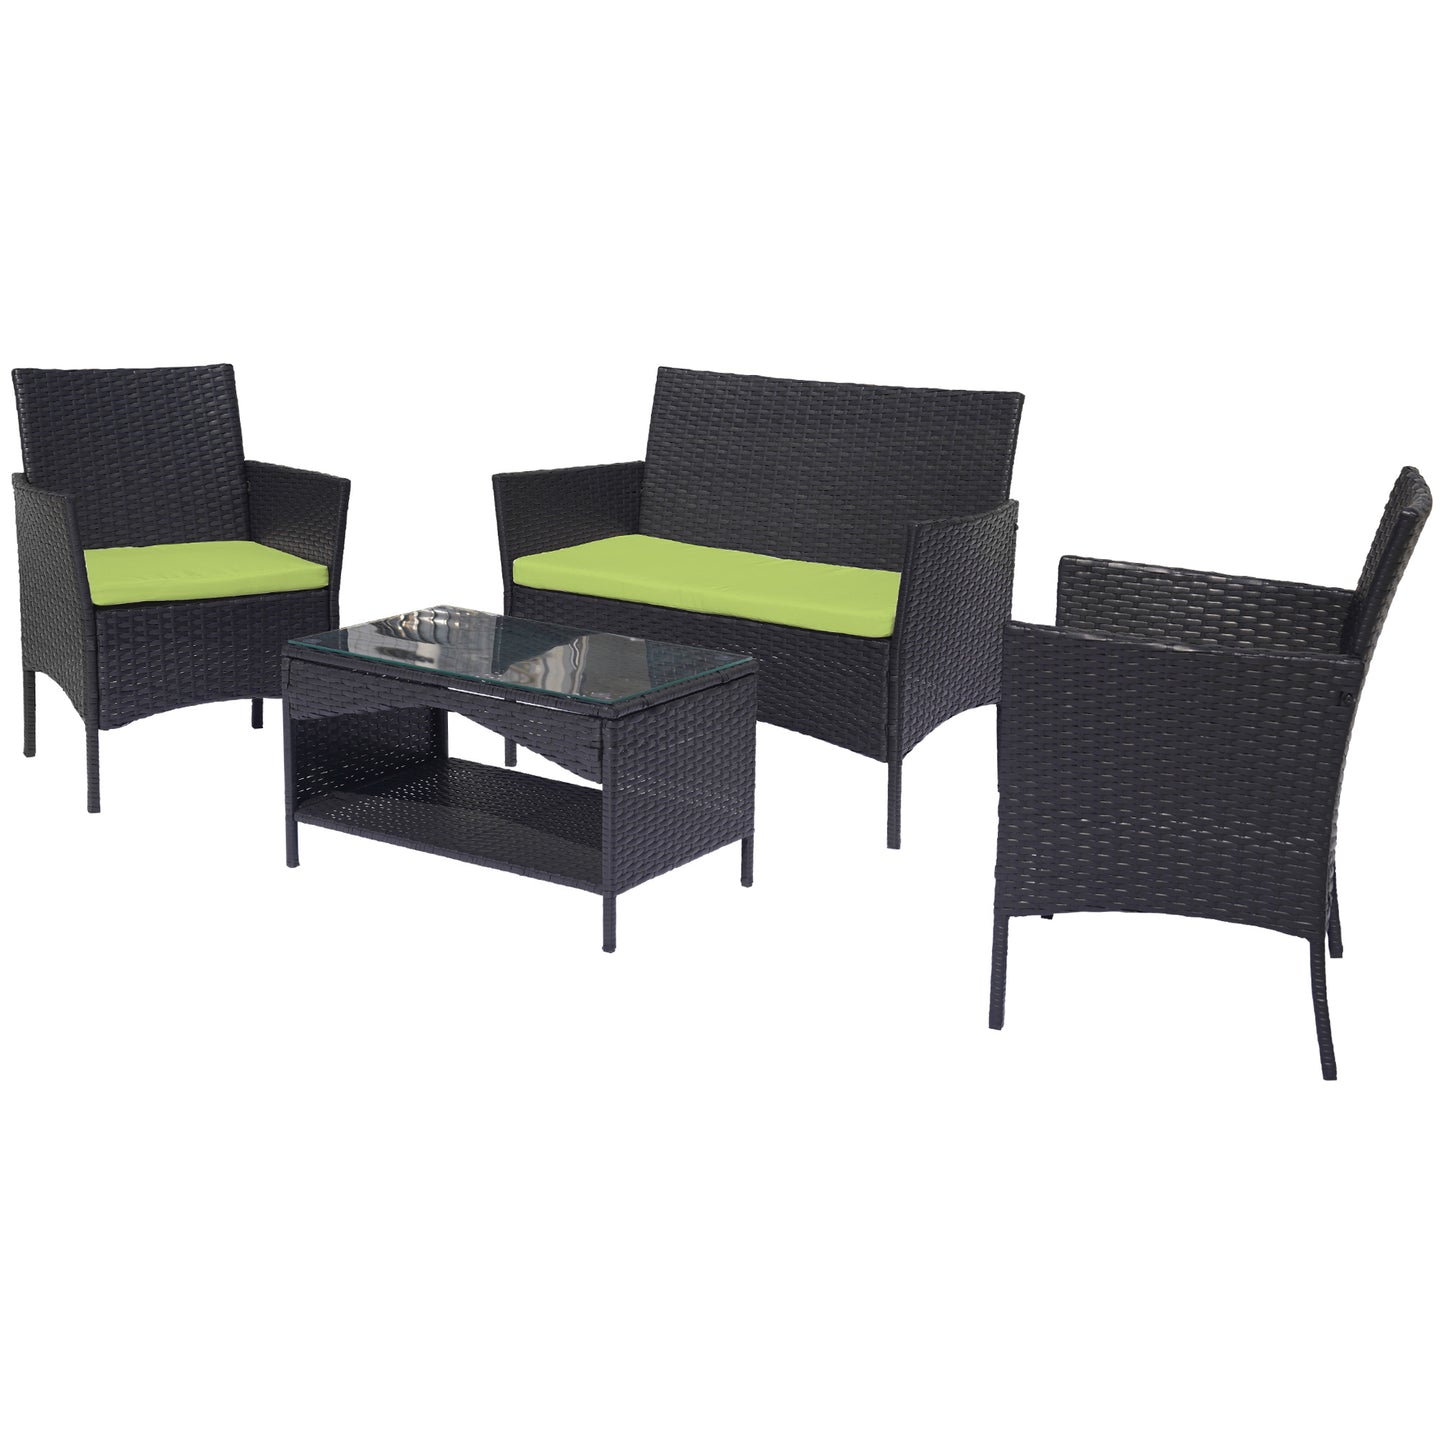 Patio Wicker Furniture Set, SYNGAR 4 Pieces Outdoor Cushioned Conversation Set with Storage Coffee Table, All Weather PE Rattan Sofa Set, Sectional Chairs Set for Backyard, Poolside, Balcony, Y020